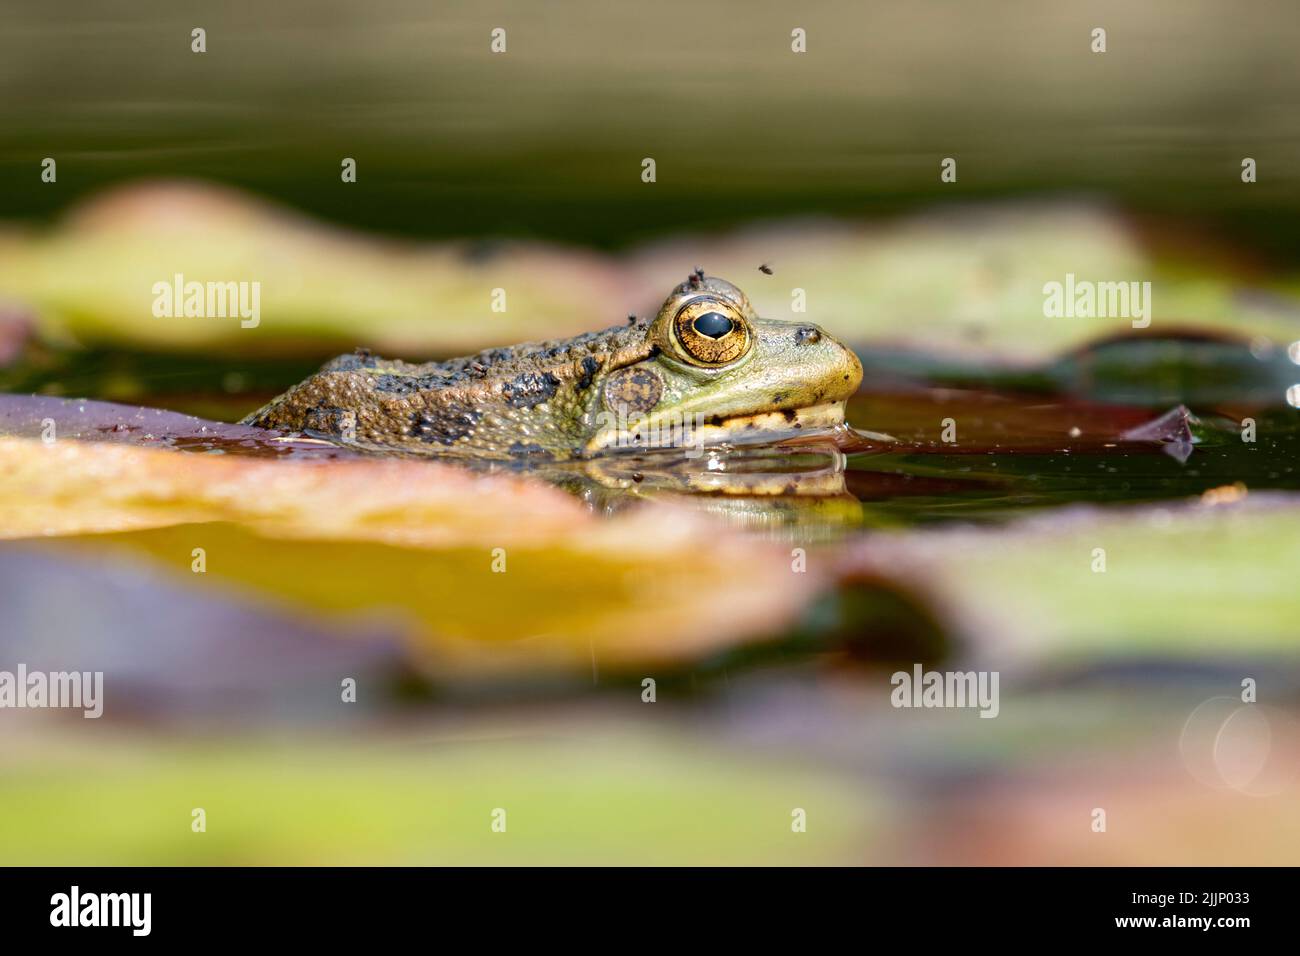 Closeup pelophylax perezi frog sitting on a green water lily leaf in the pond Stock Photo